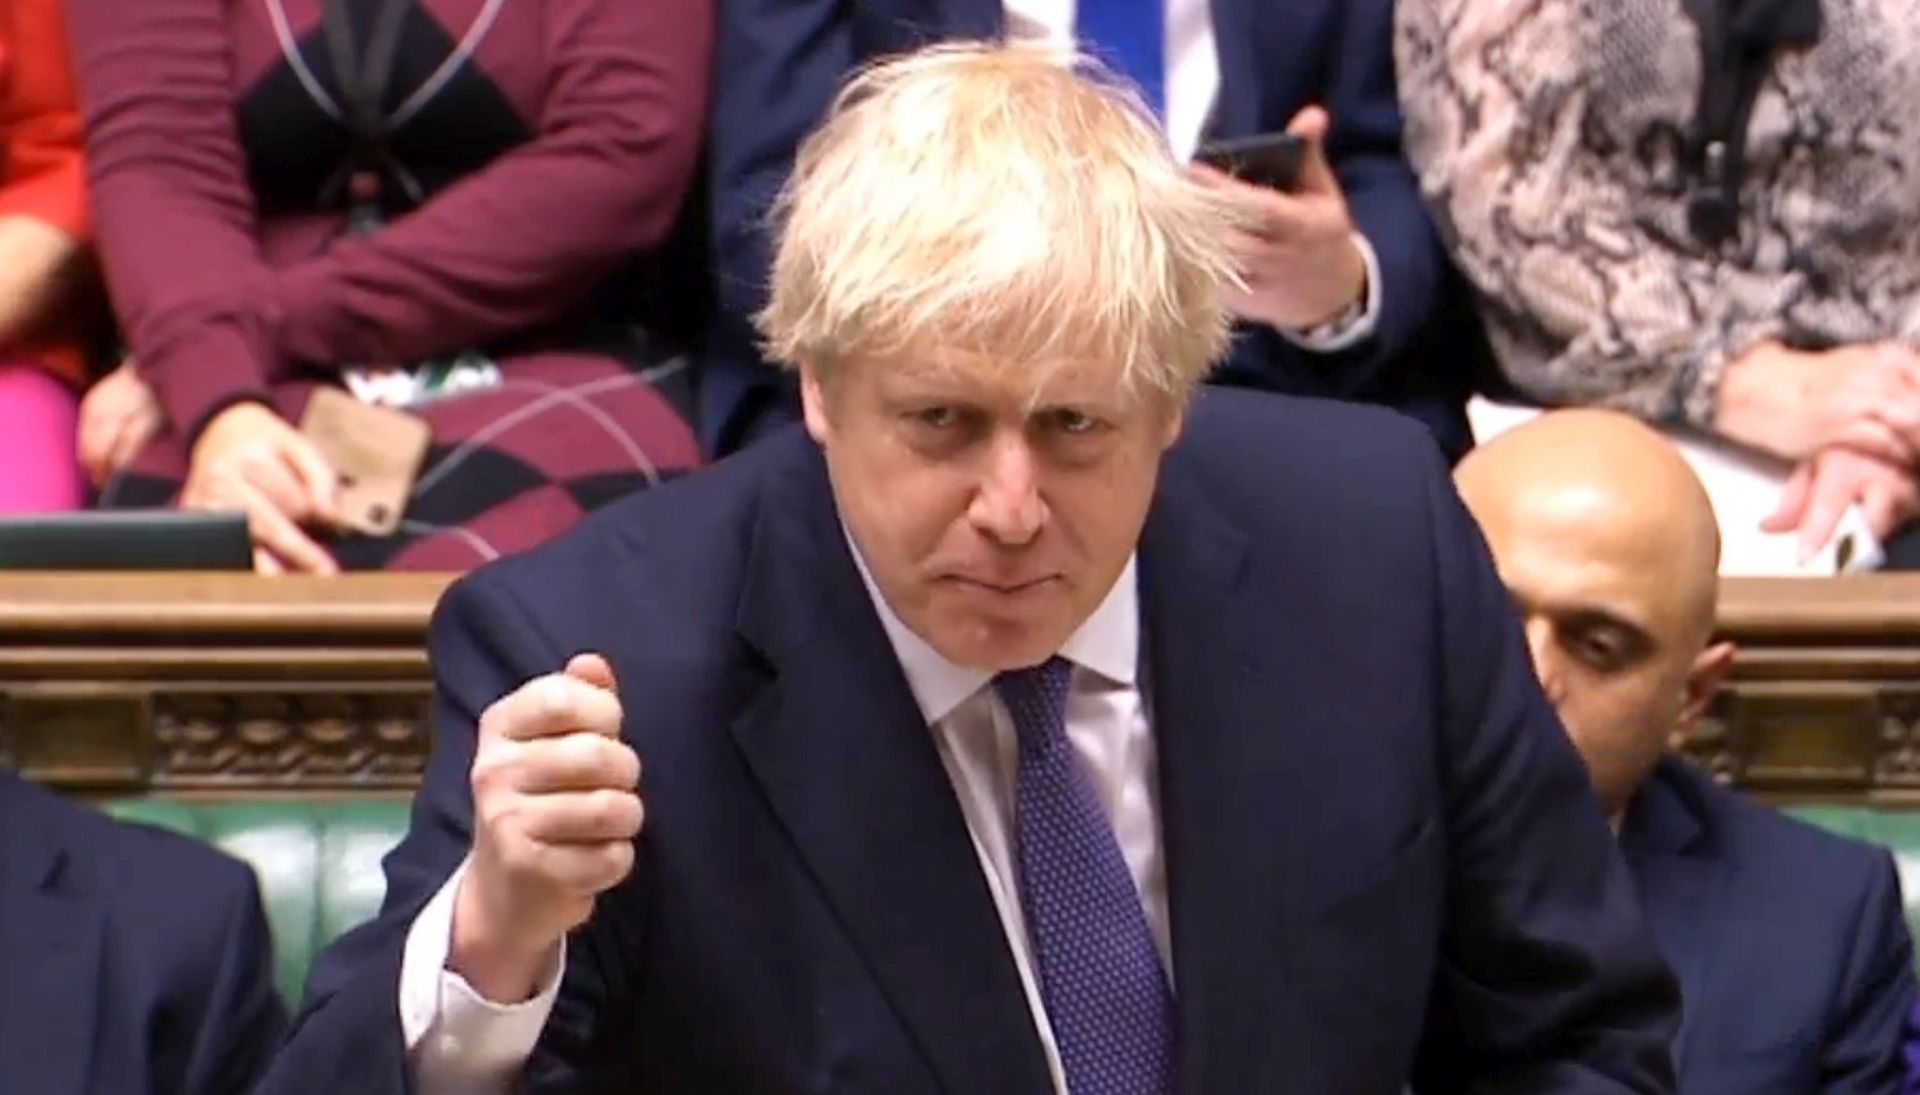 epa08082956 A grab from a handout video made available by the UK Parliamentary Recording Unit shows British Prime Minister Boris Johnson addressing MPs at the House of Commons, in London, Britain, 20 December 2019. Members of Parliament gathered in the Commons for the first time since the 12 December election. The MPs are due to vote later today on Johnson's plan for the United Kingdom to leave the EU on 31 January 2020.  EPA/UK PARLIAMENTARY RECORDING UNIT / HANDOUT MANDATORY CREDIT: UK PARLIAMENTARY RECORDING UNIT HANDOUT EDITORIAL USE ONLY/NO SALES